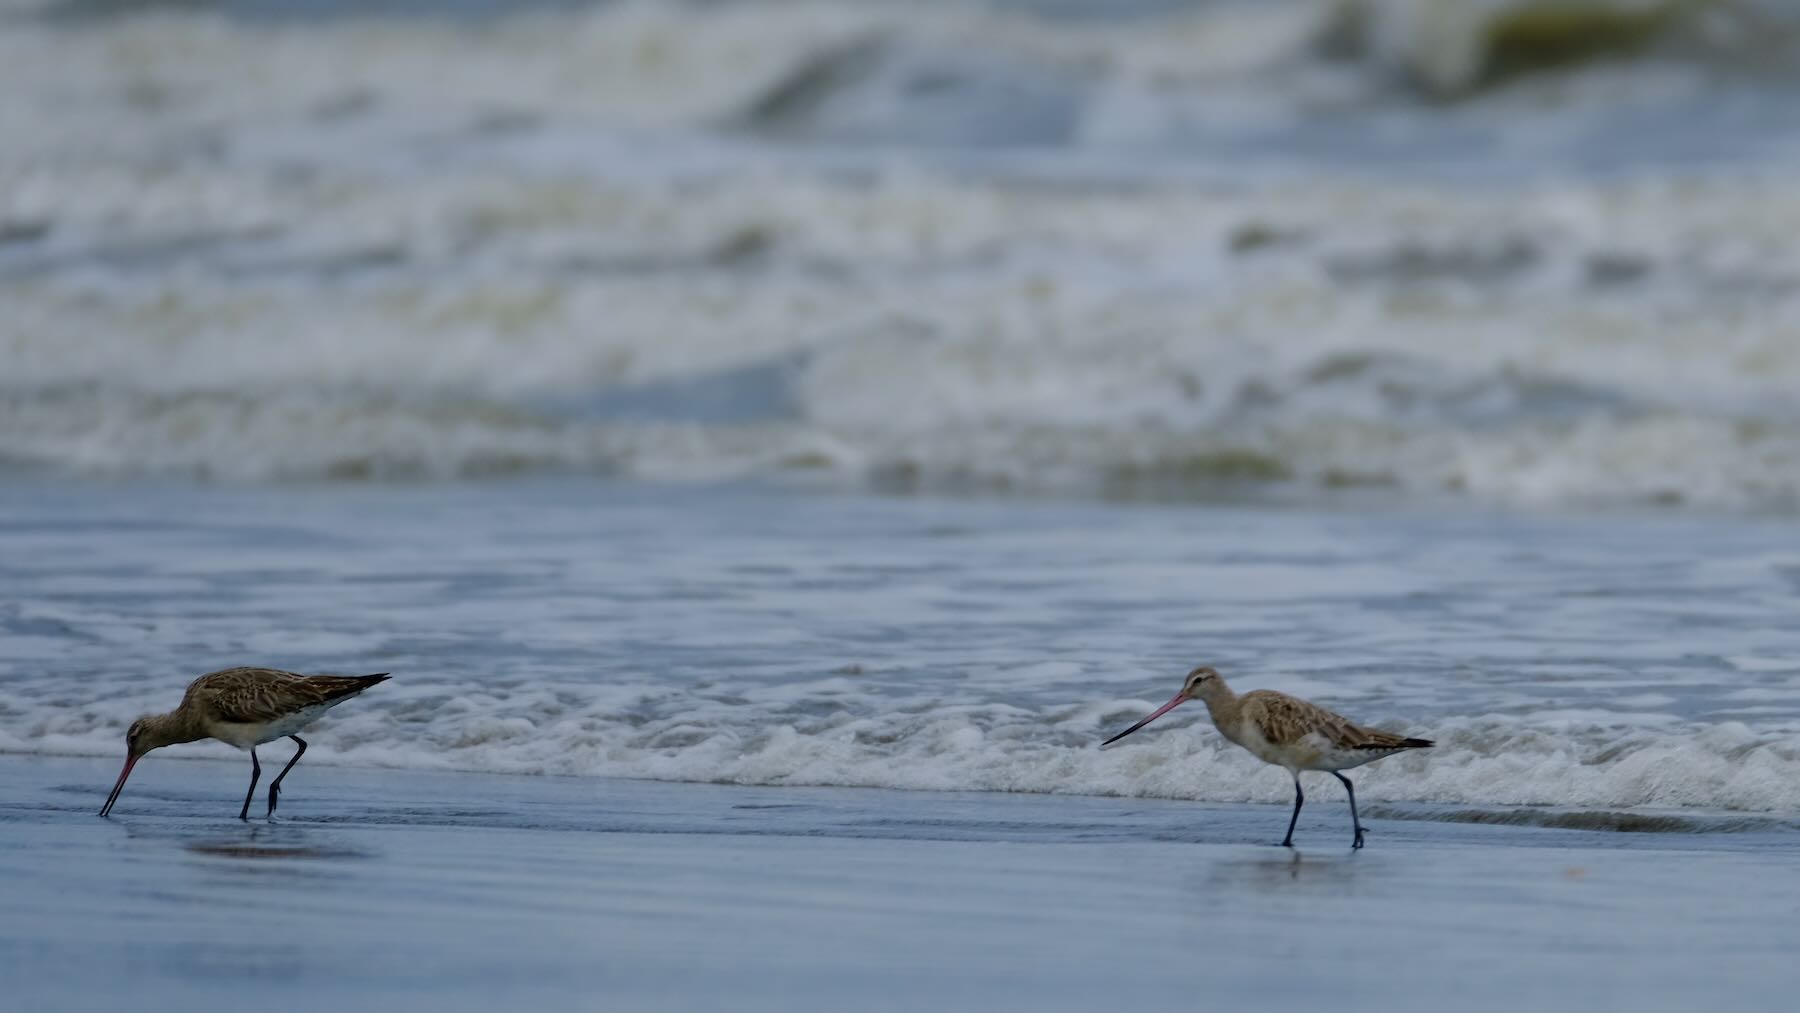 Two long-beaked wading birds in the beach shallows. 